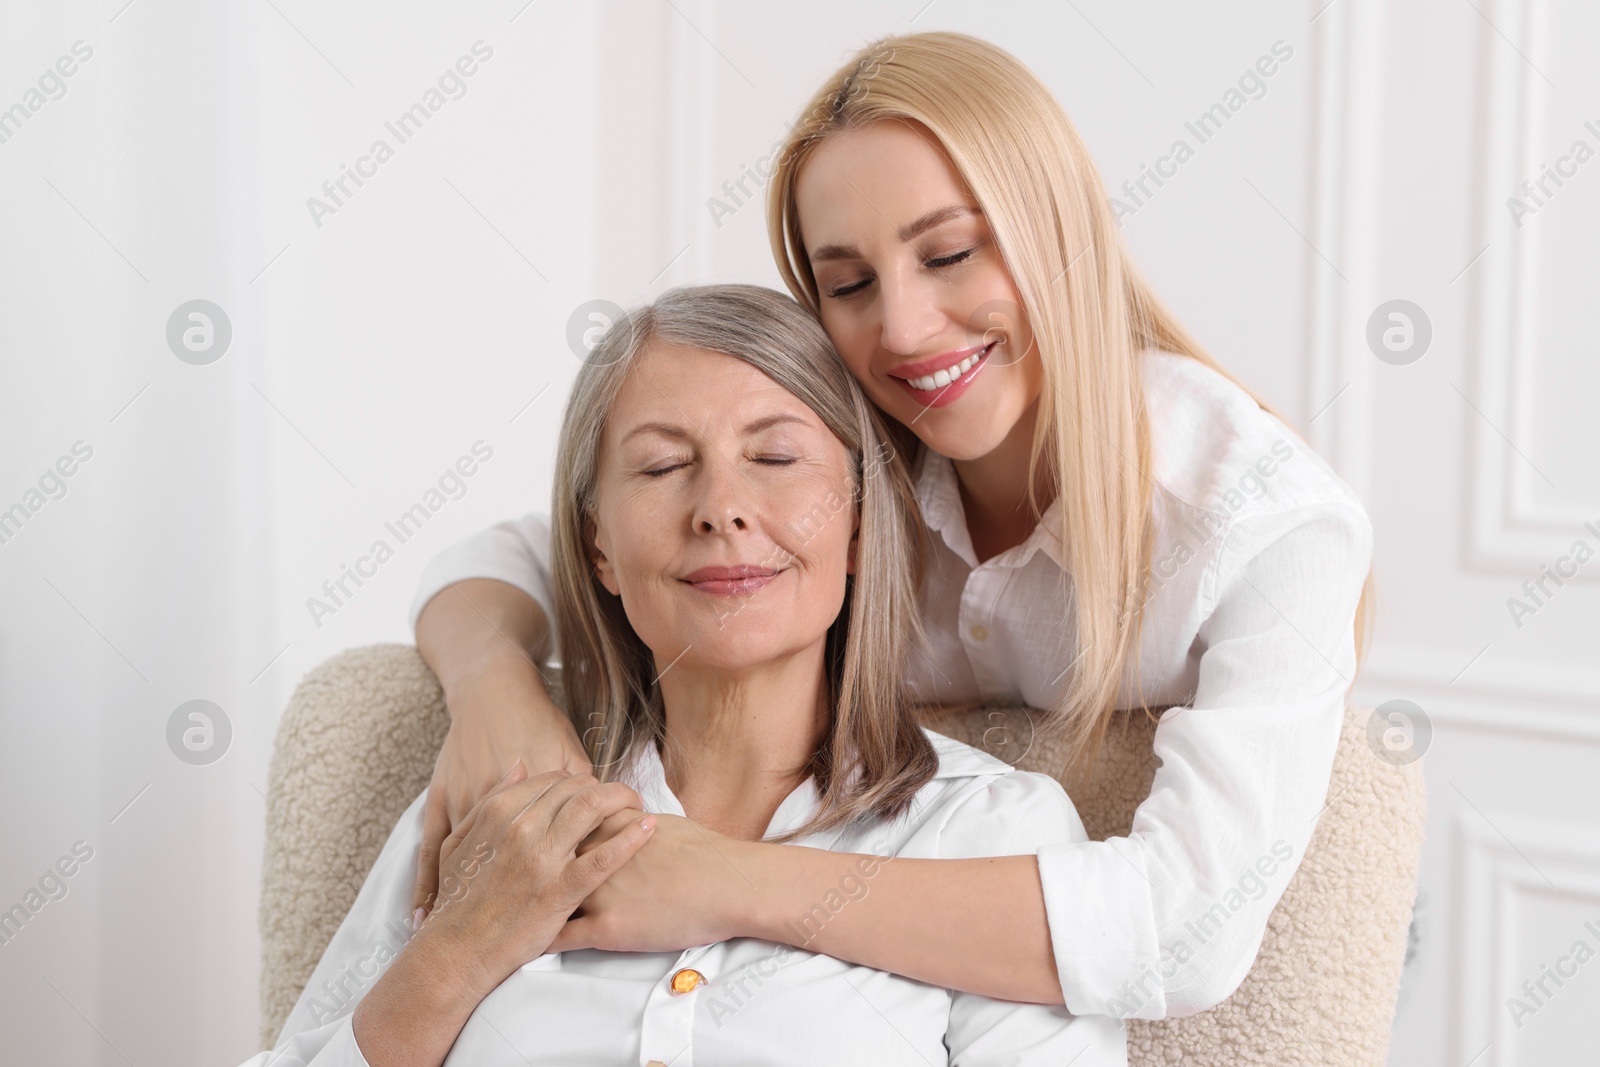 Photo of Family portrait of young woman and her mother near white wall